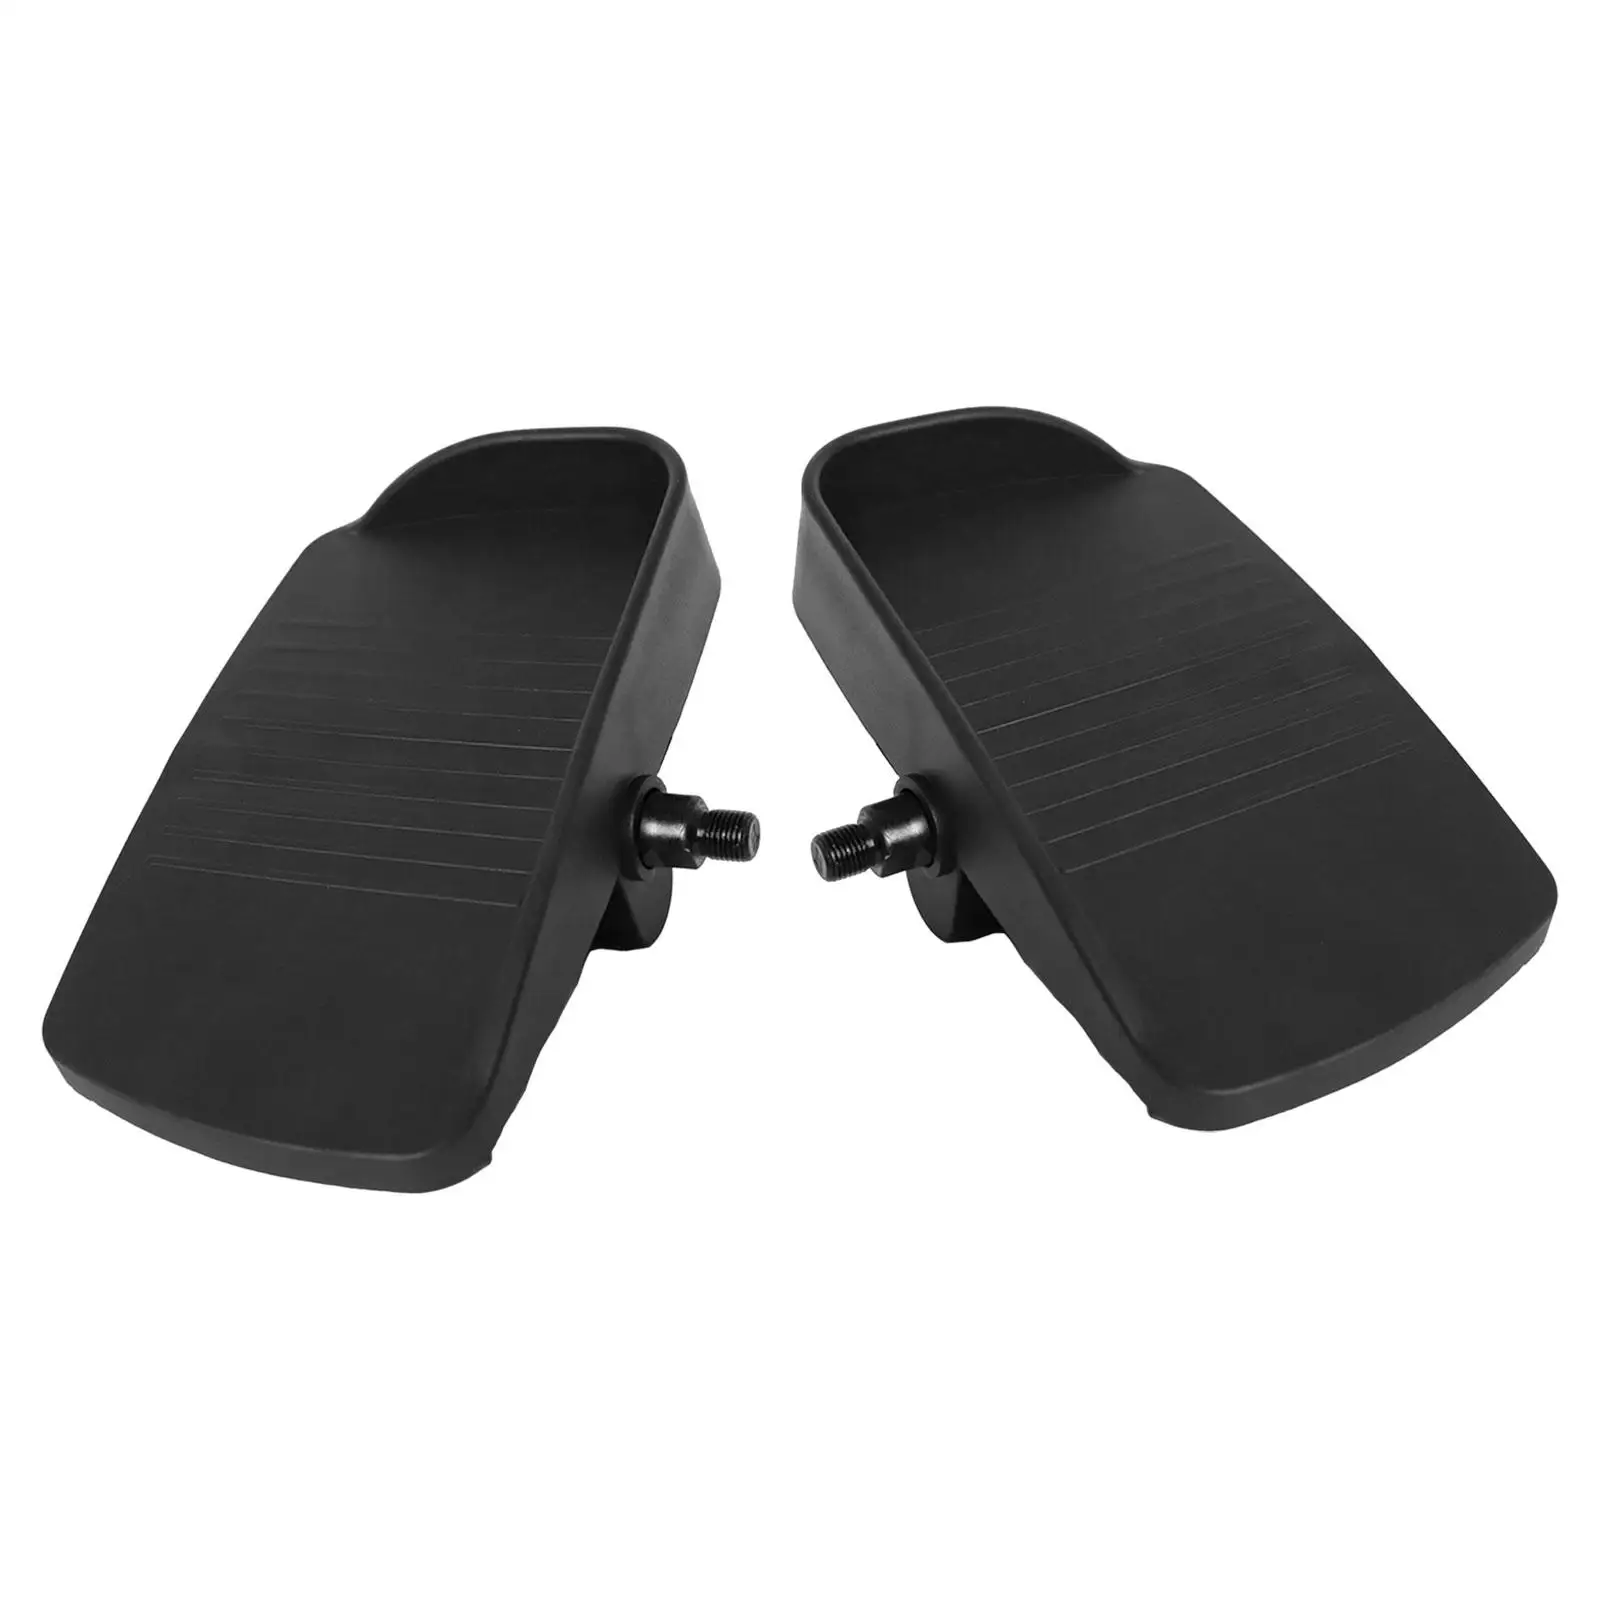 2 Pieces Stair Stepper Pedal Multifunction Elliptical Machine Foot Pedals